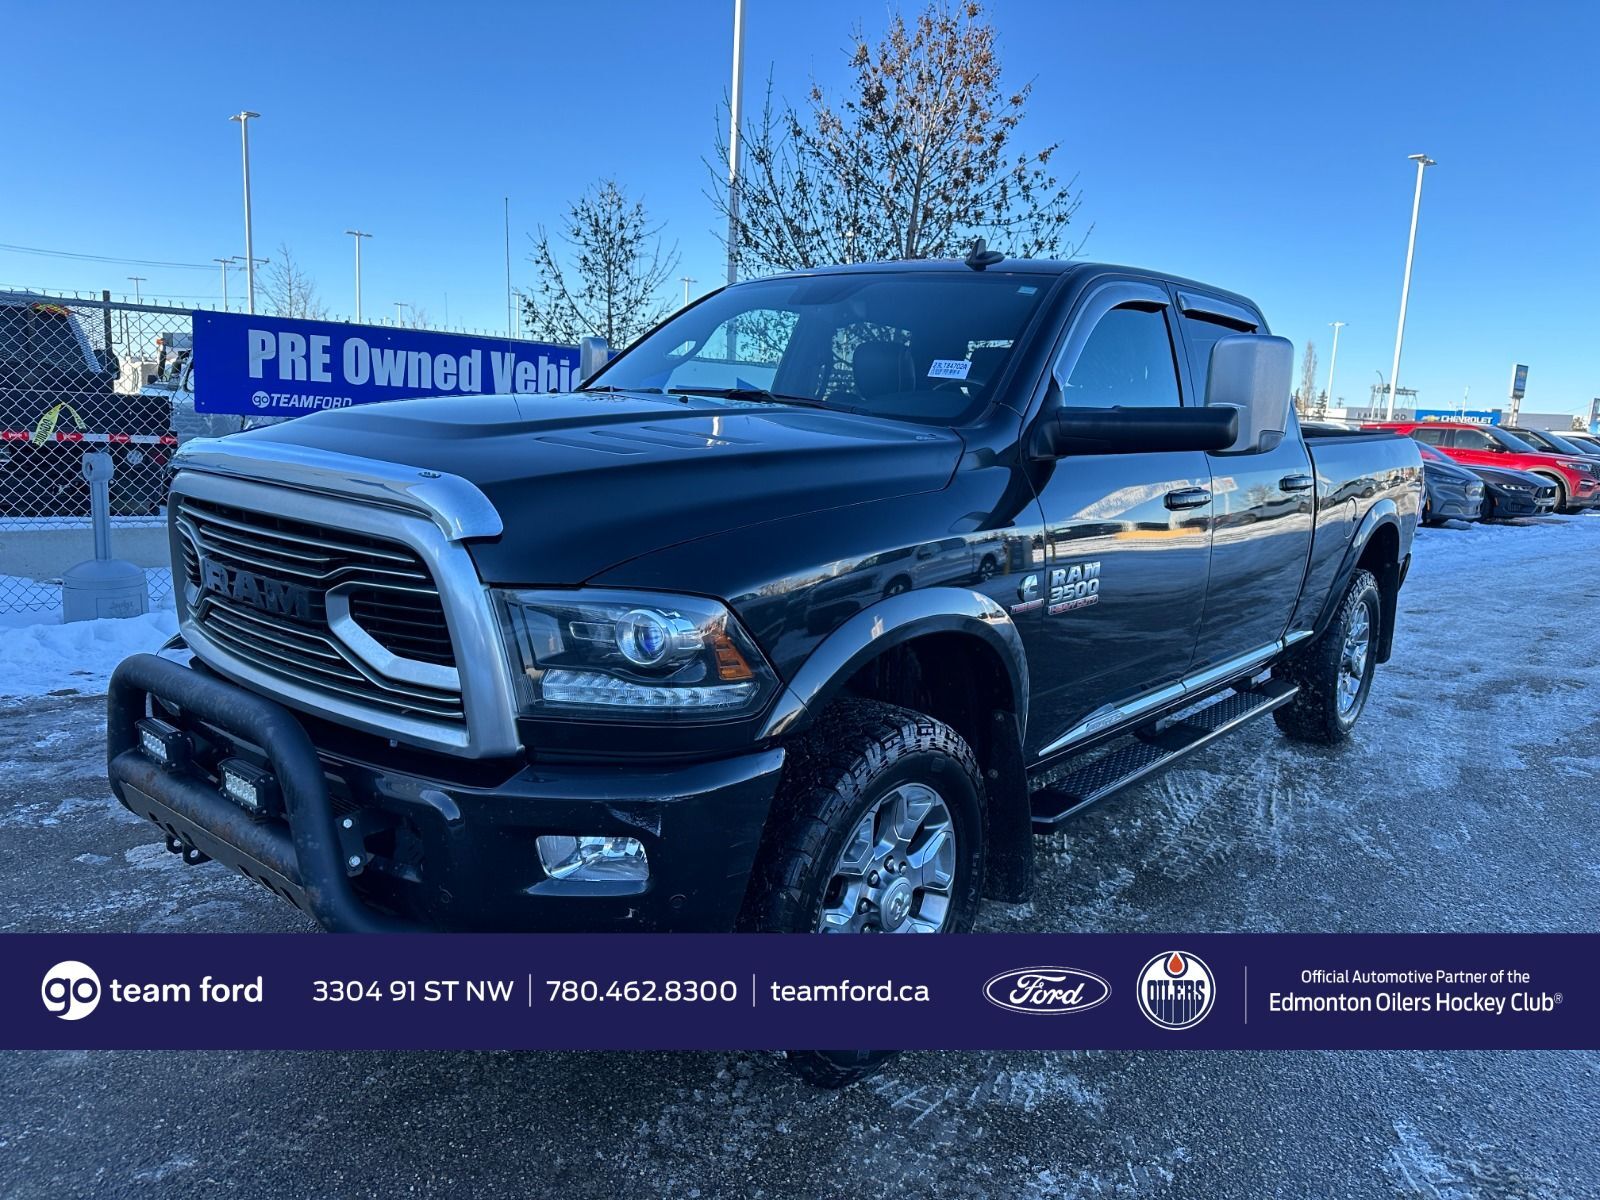 2018 Ram 3500 LIMITED TUNGSTEN EDITION - HEATED AND COOLED SEATS